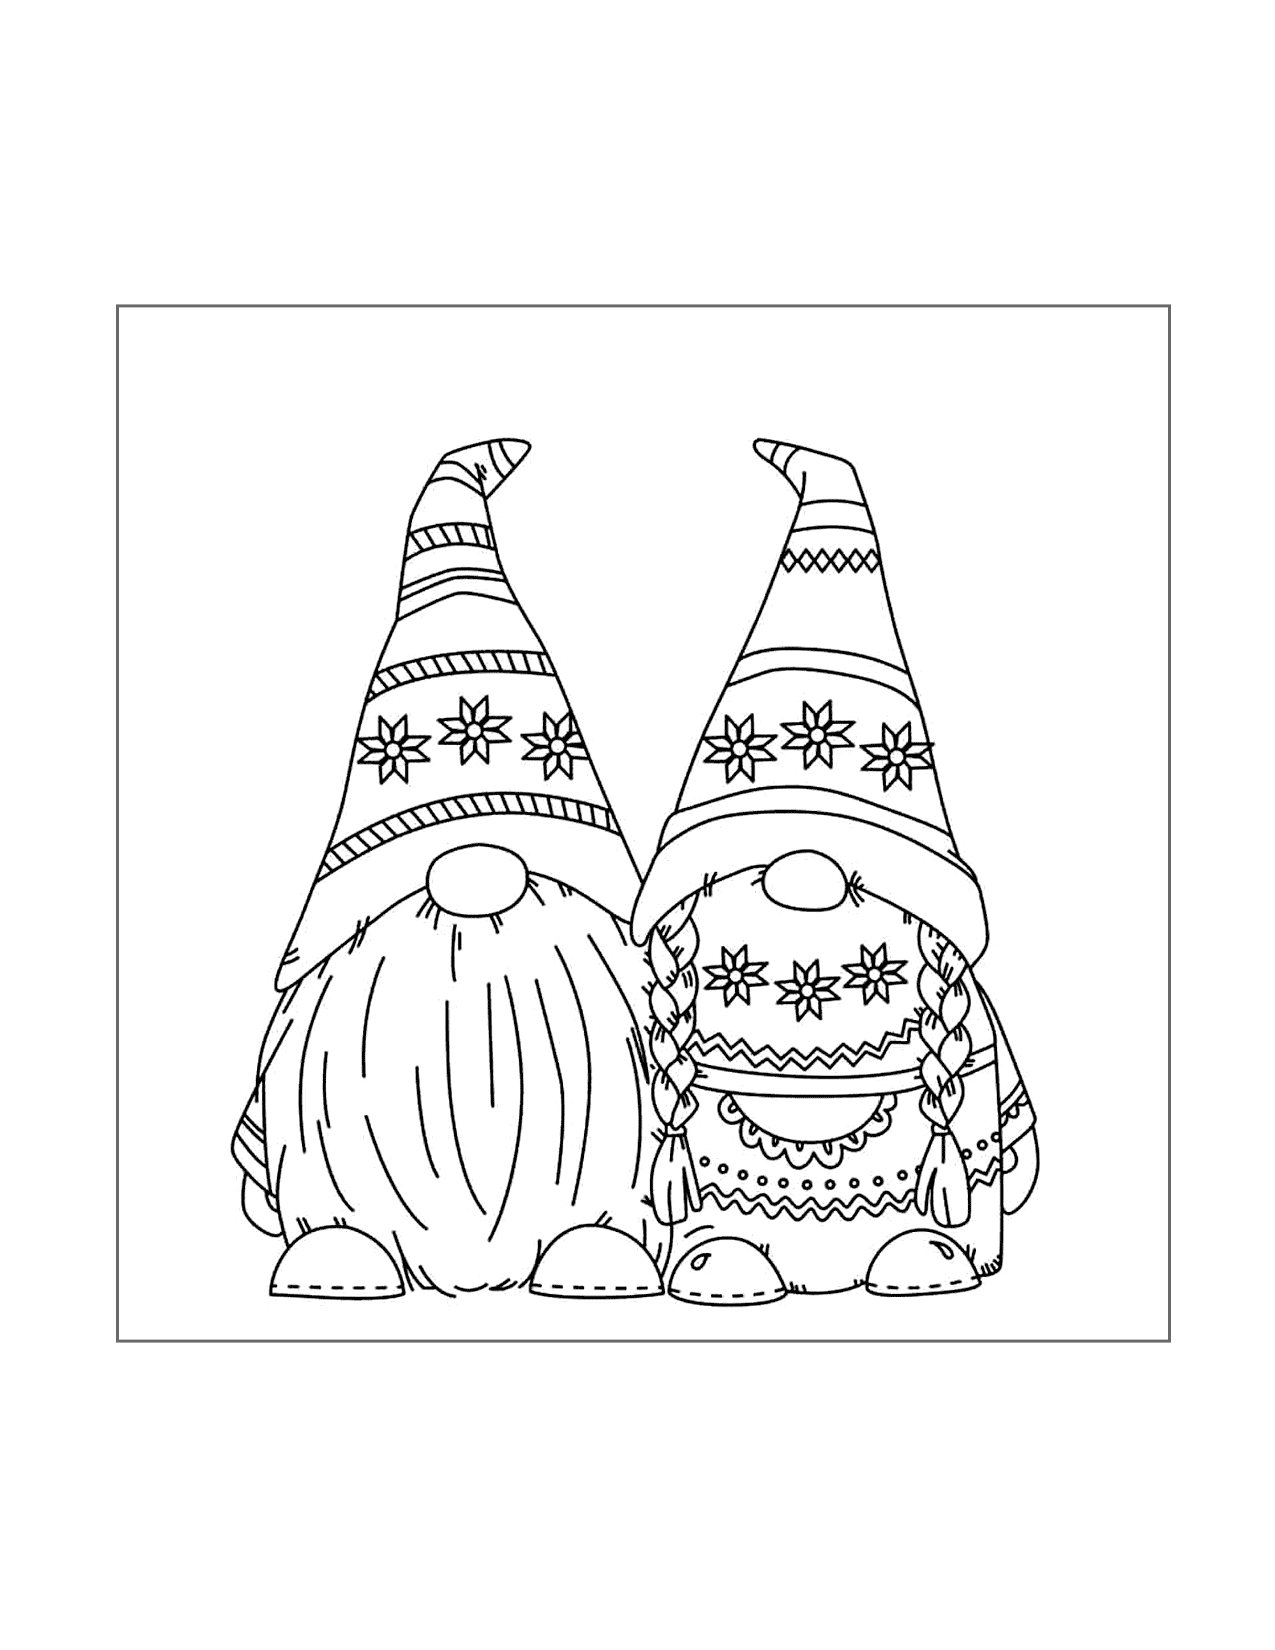 Two Winter Gnomes Coloring Page